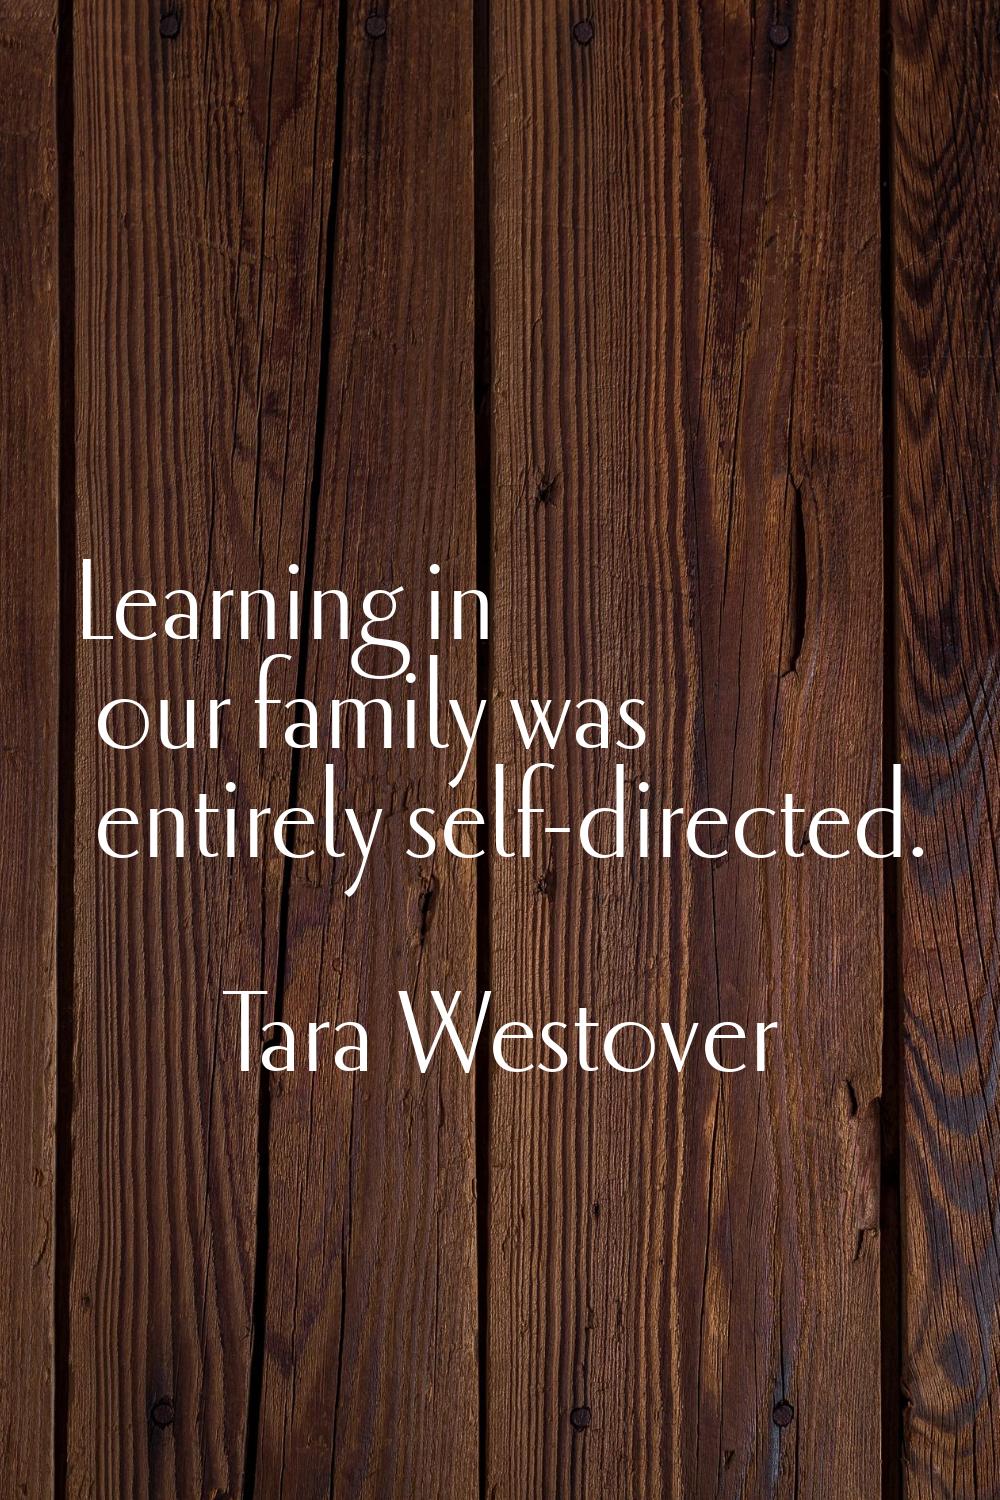 Learning in our family was entirely self-directed.